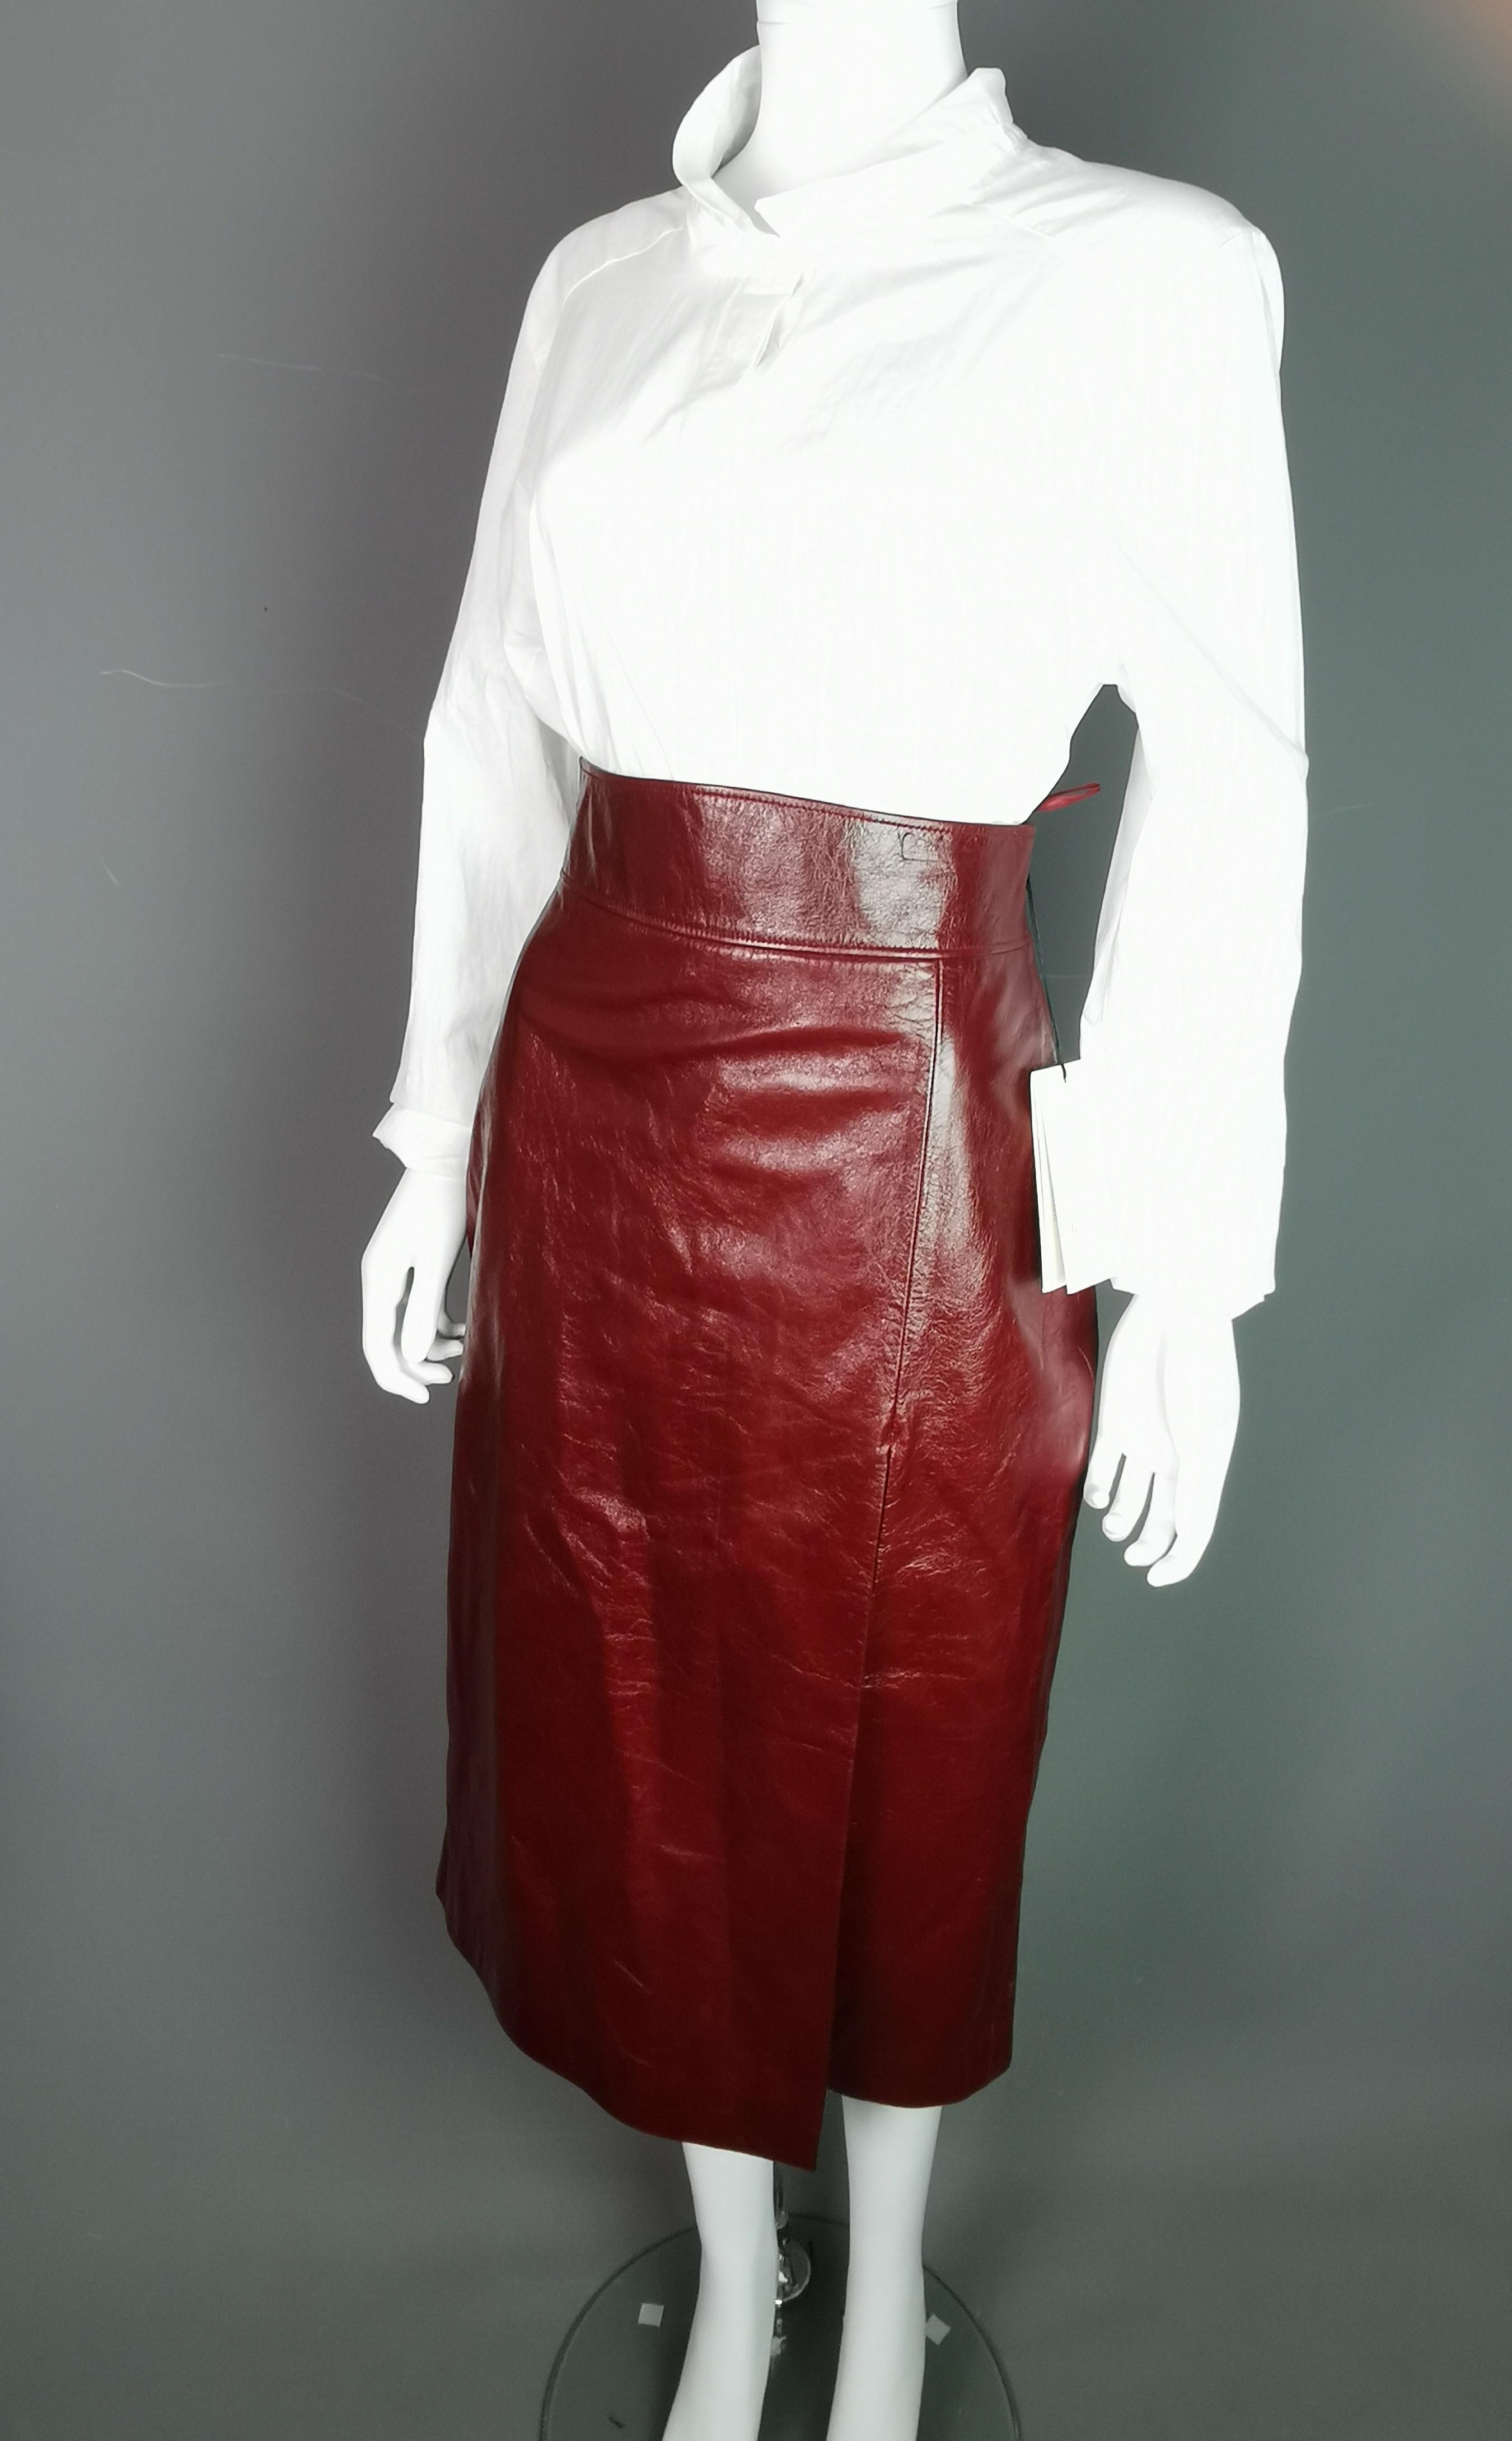 You can't help but love this Gucci SS20 runway high rise leather pencil skirt.

Really taking the leather skirt to the next level with its gorgeous high rise waist line, soft supple wine red or burgandy leather and a well placed side leg